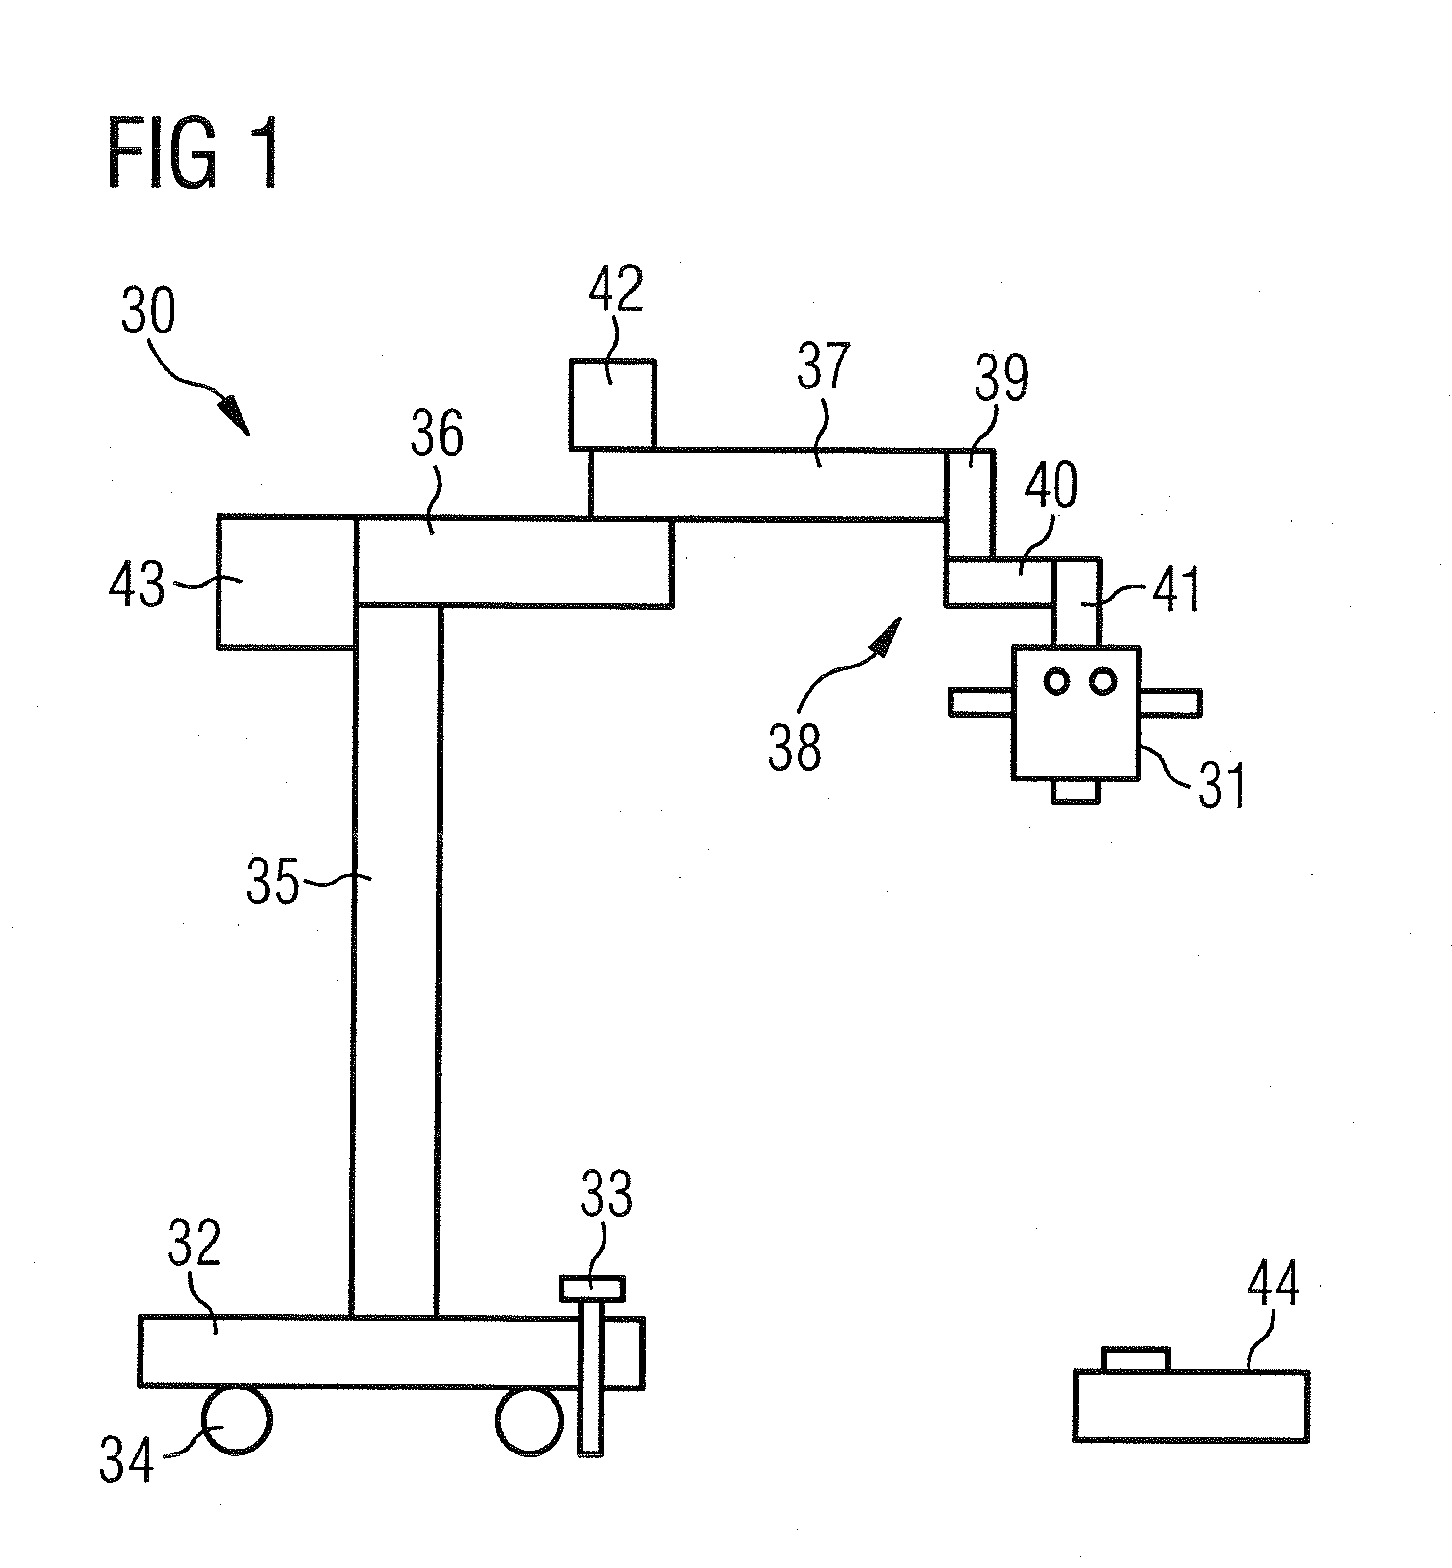 Remote control system for medical apparatus